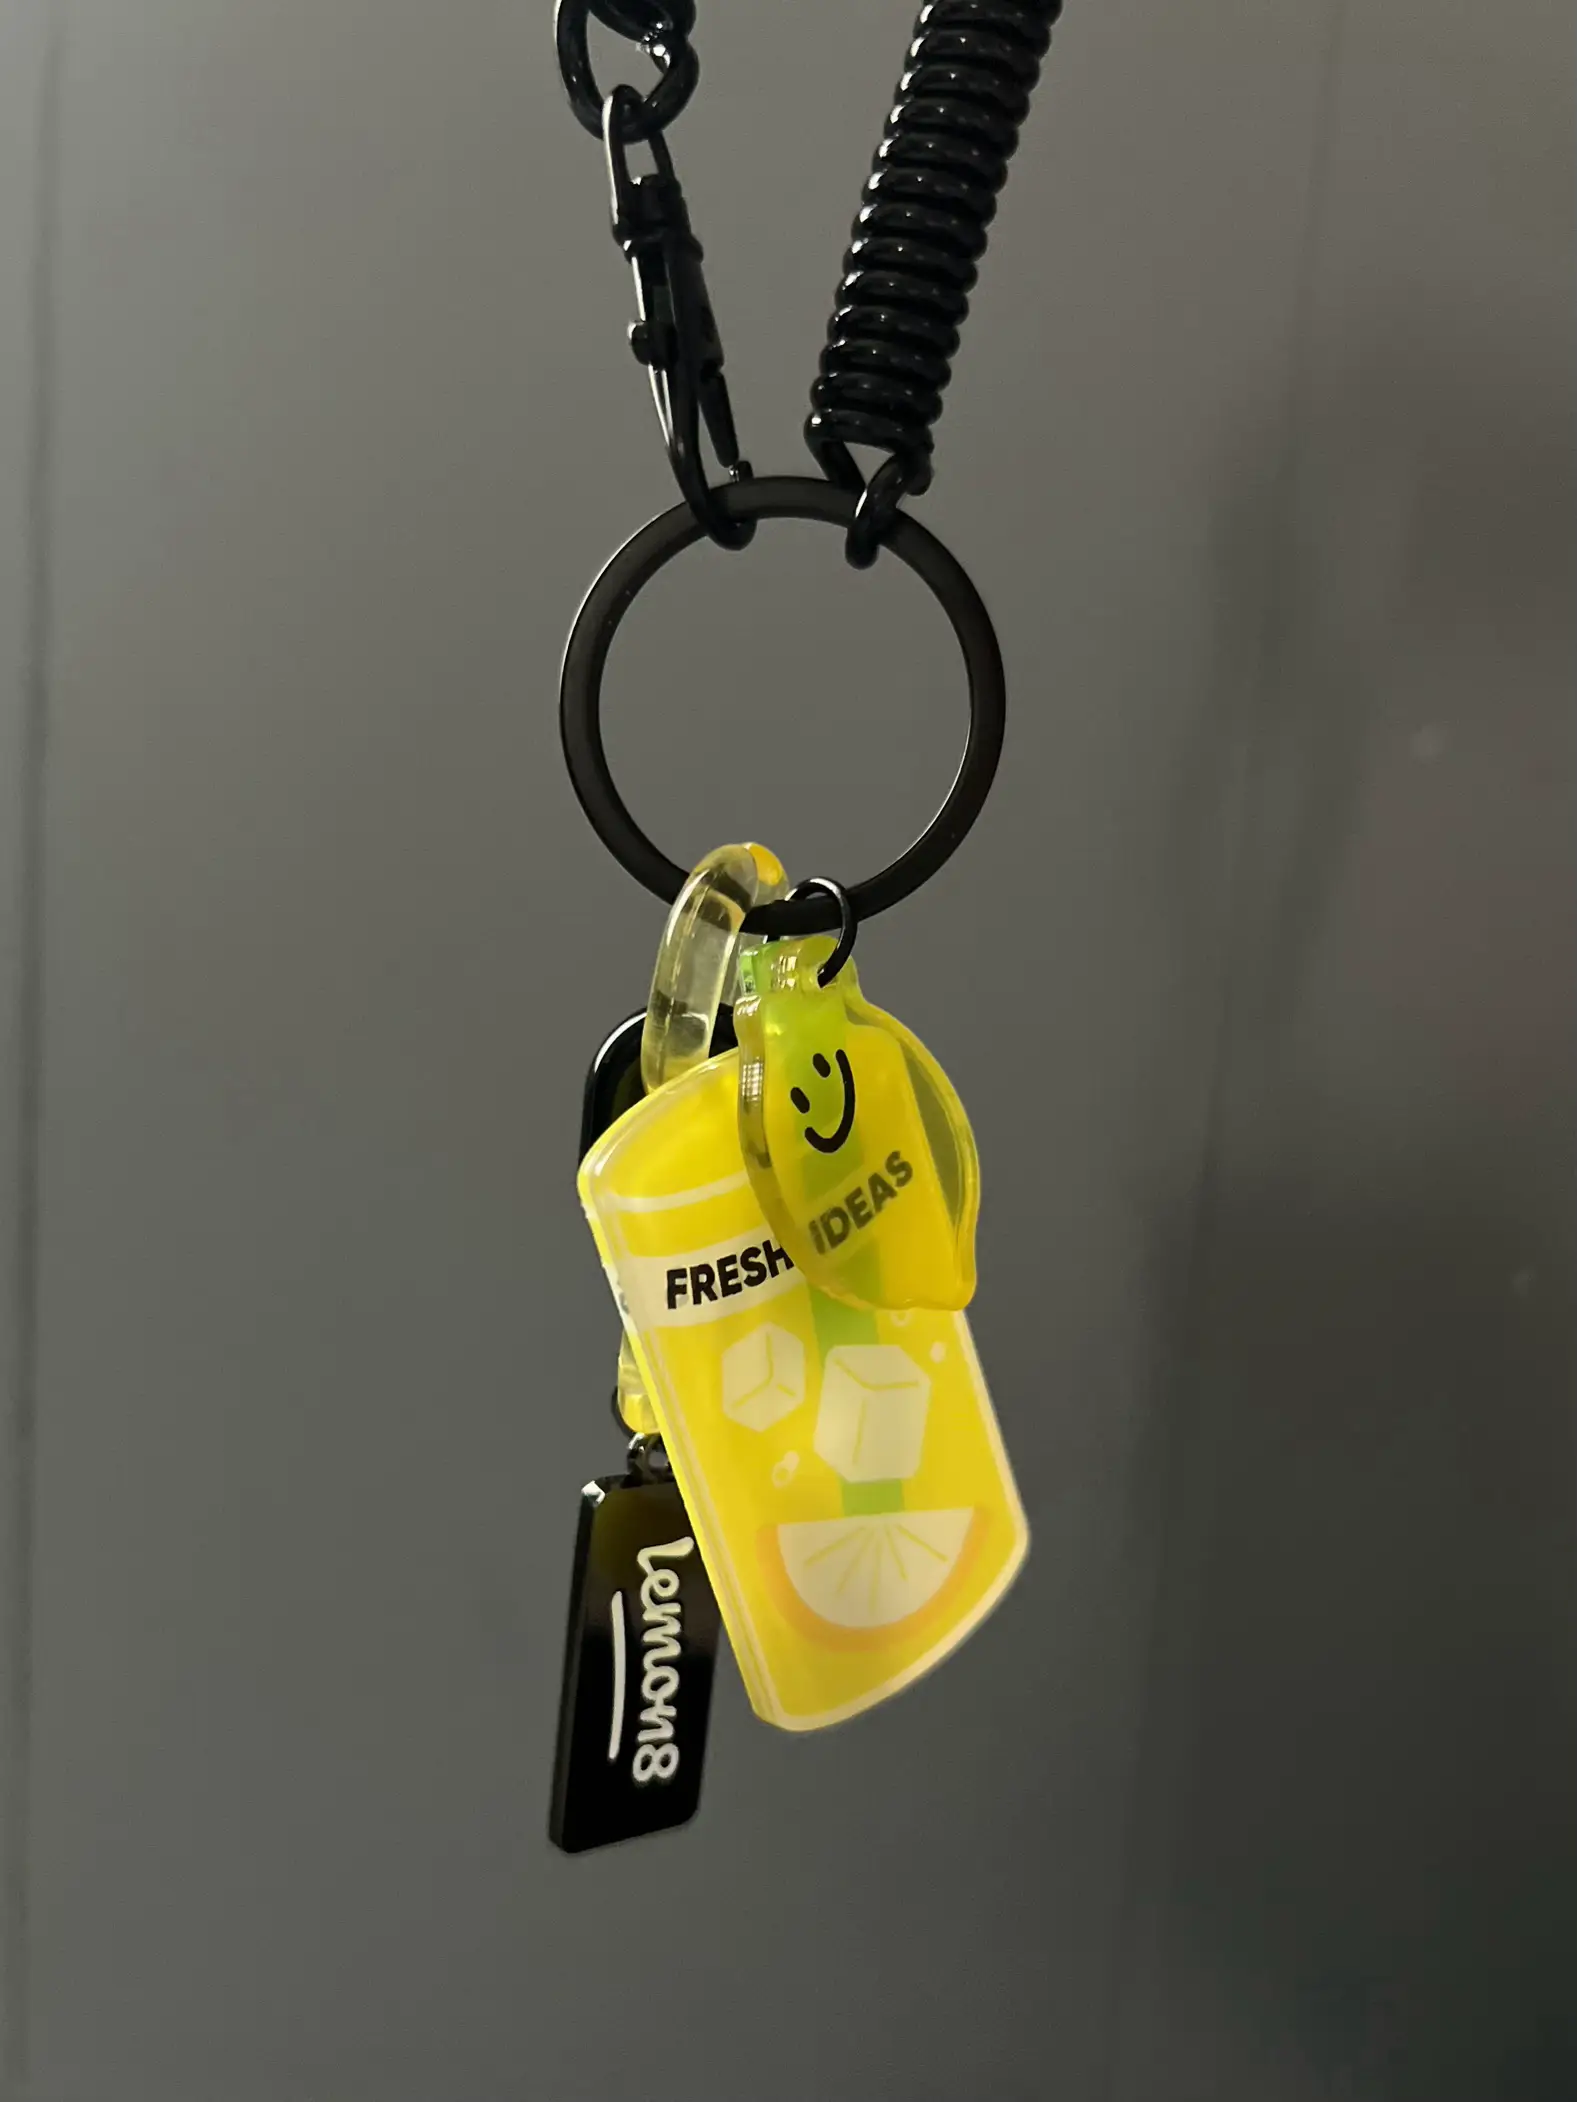  A keychain with a lemon on it.